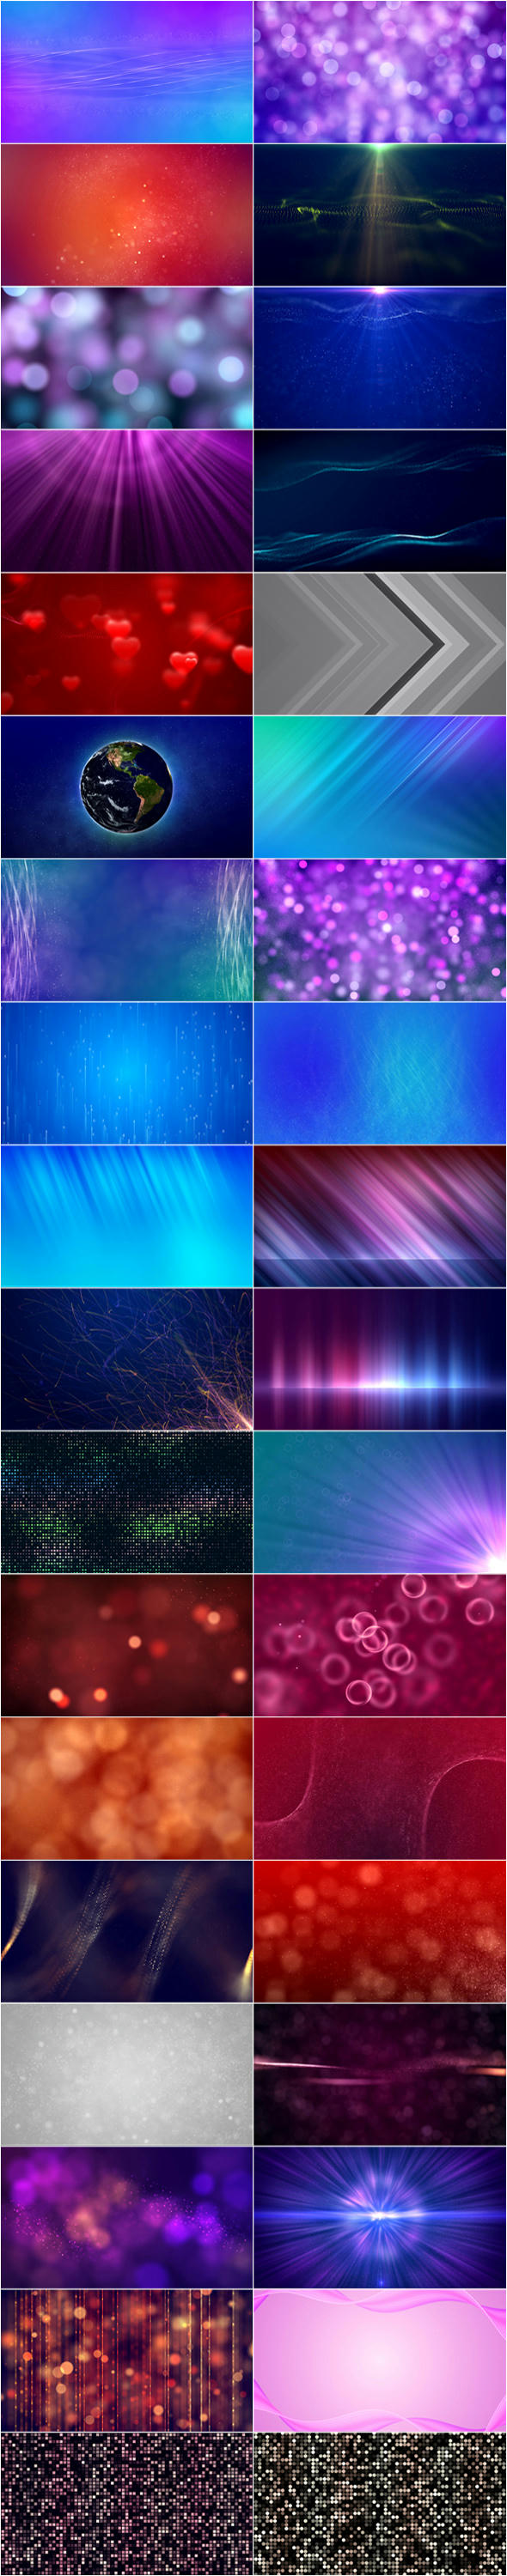 Videohive Background Loop 400+ 12693561 Free After Effects Template